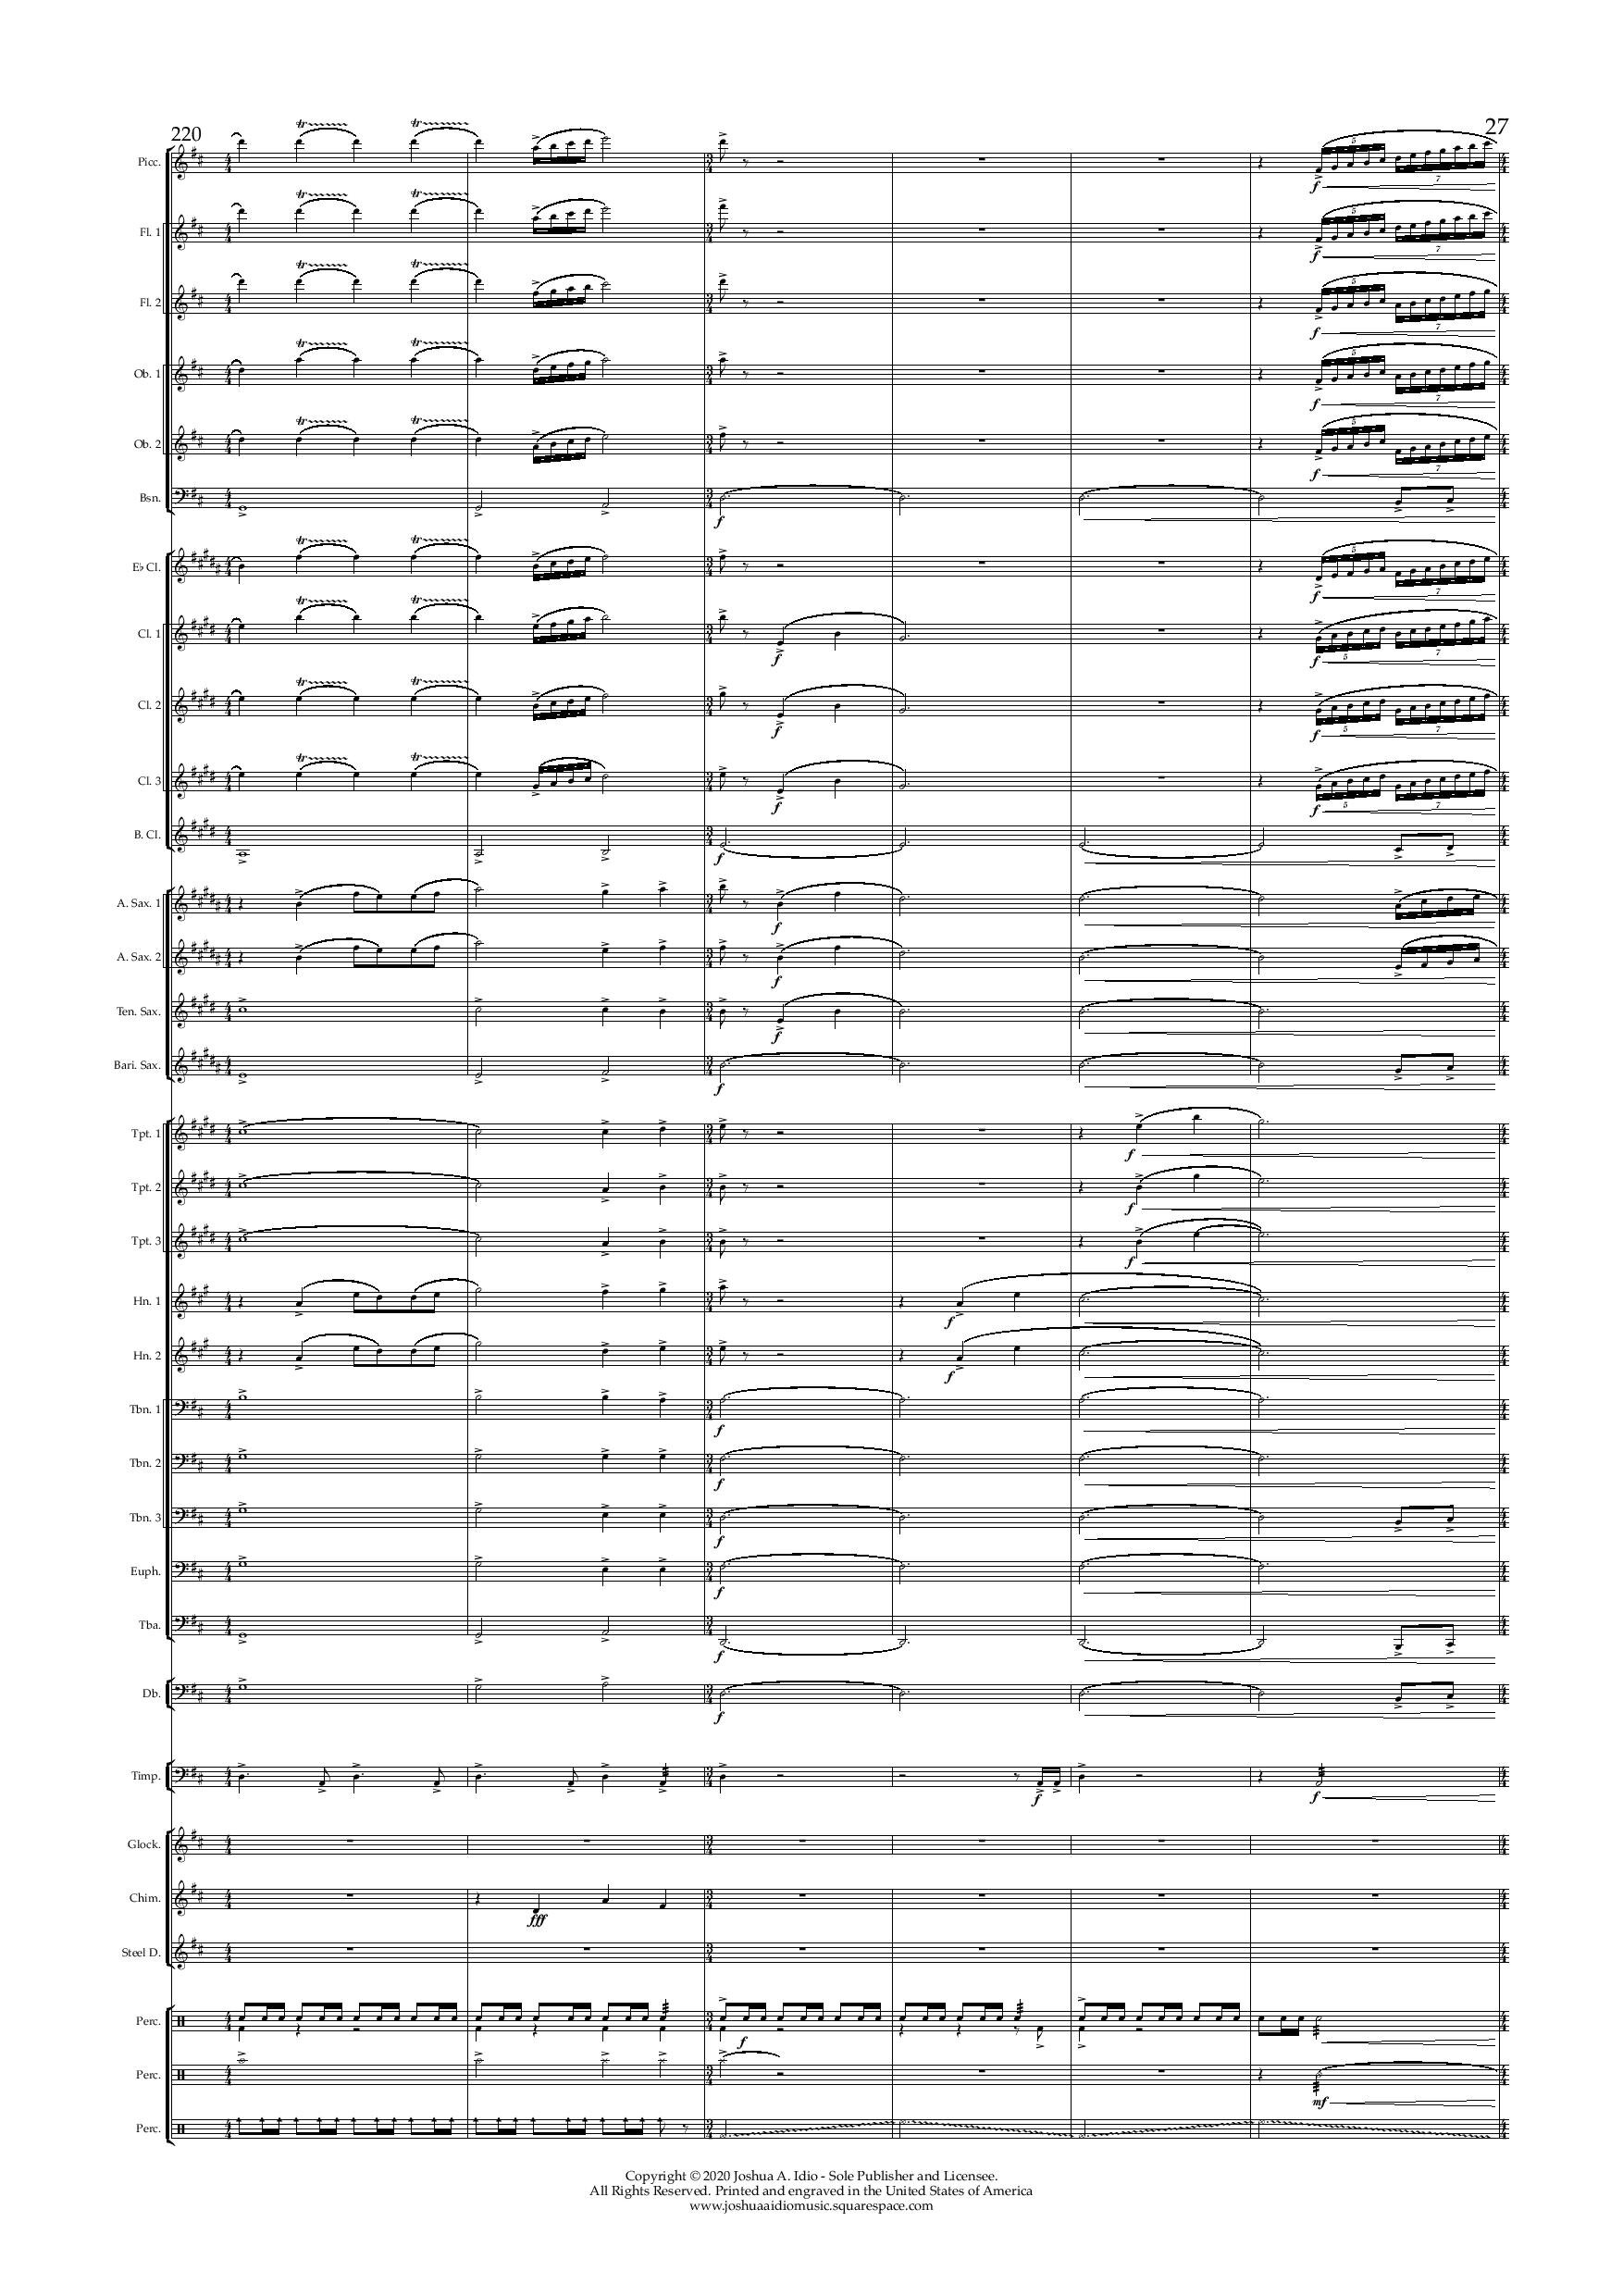 The Cruise Line Dream - Conductor s Score-page-027.jpg